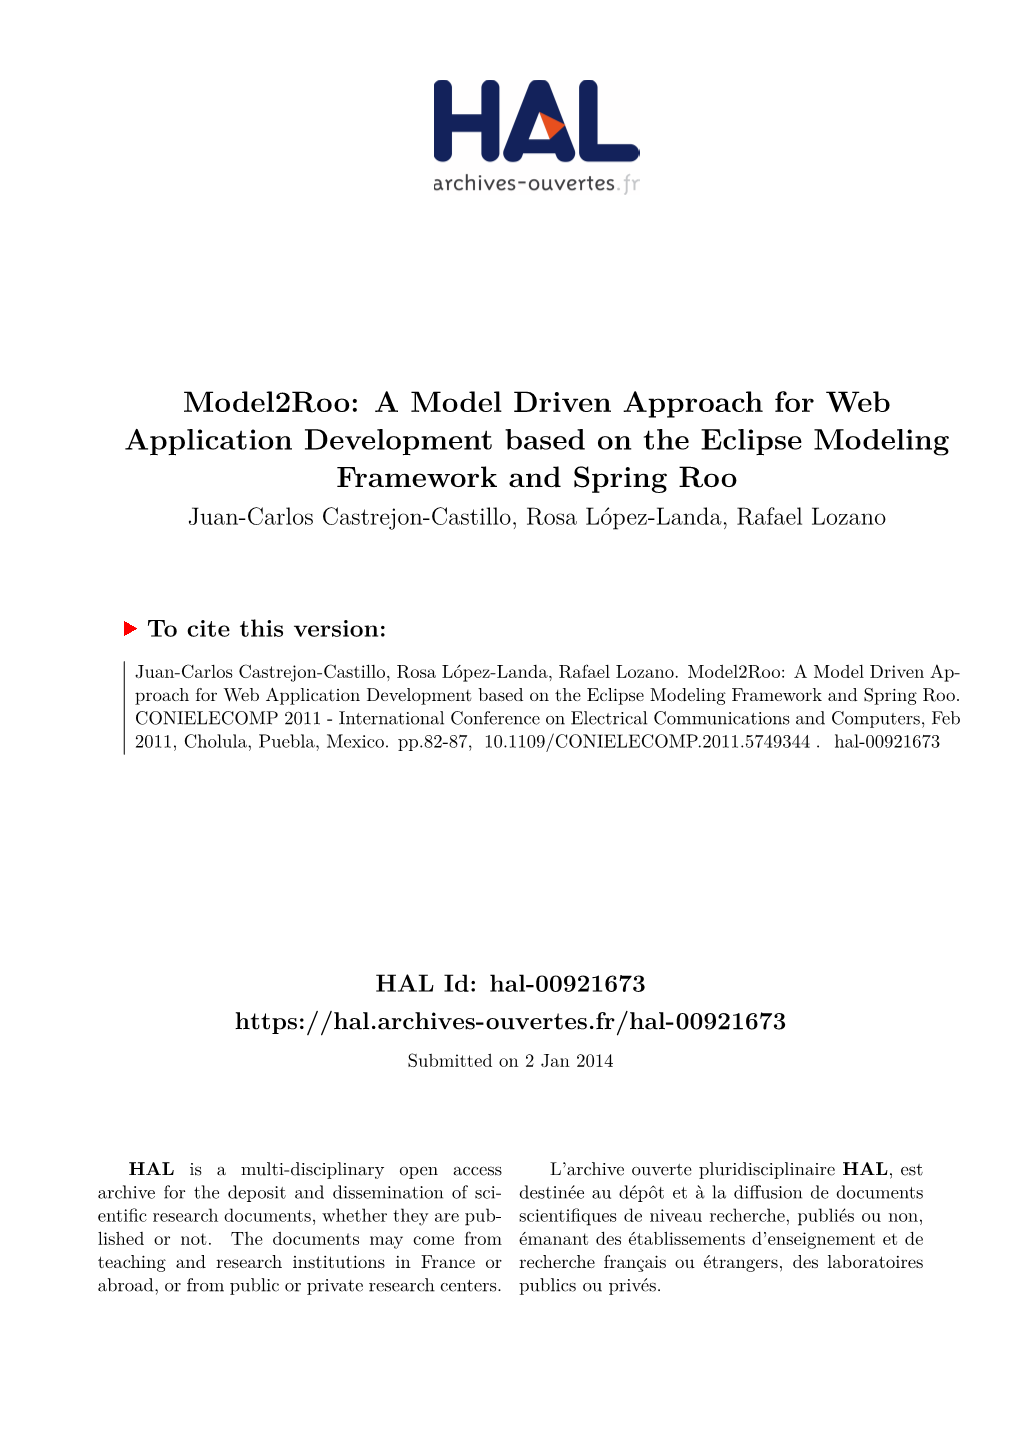 Model2roo: a Model Driven Approach for Web Application Development Based on the Eclipse Modeling Framework and Spring